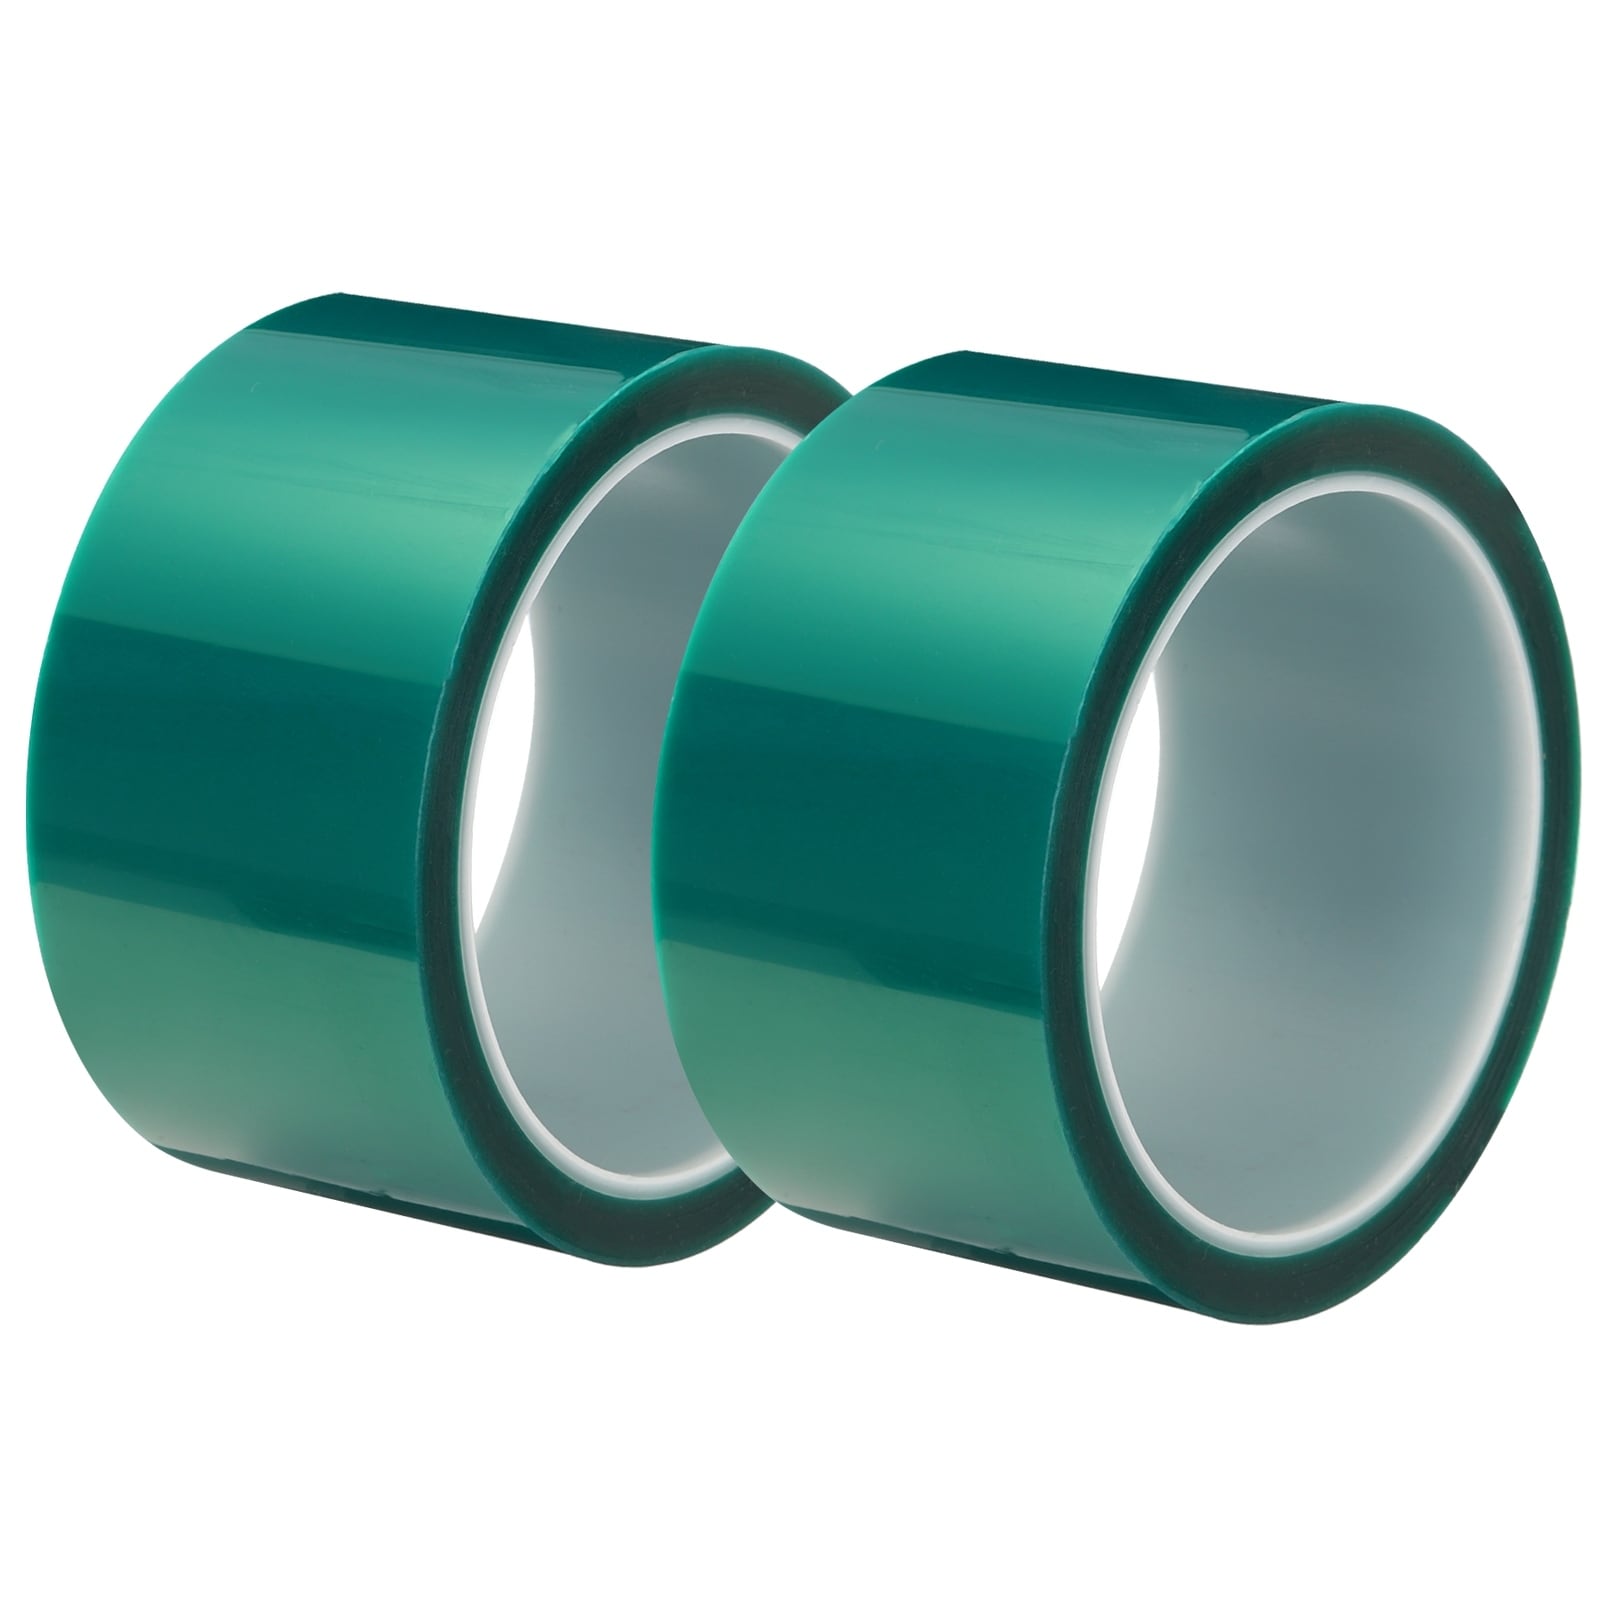 Resin Tape Silicone Adhesive Tape for Epoxy Resin,1.97 Inch Wide 108FT  Long,2PCS - Green - Bed Bath & Beyond - 39178367